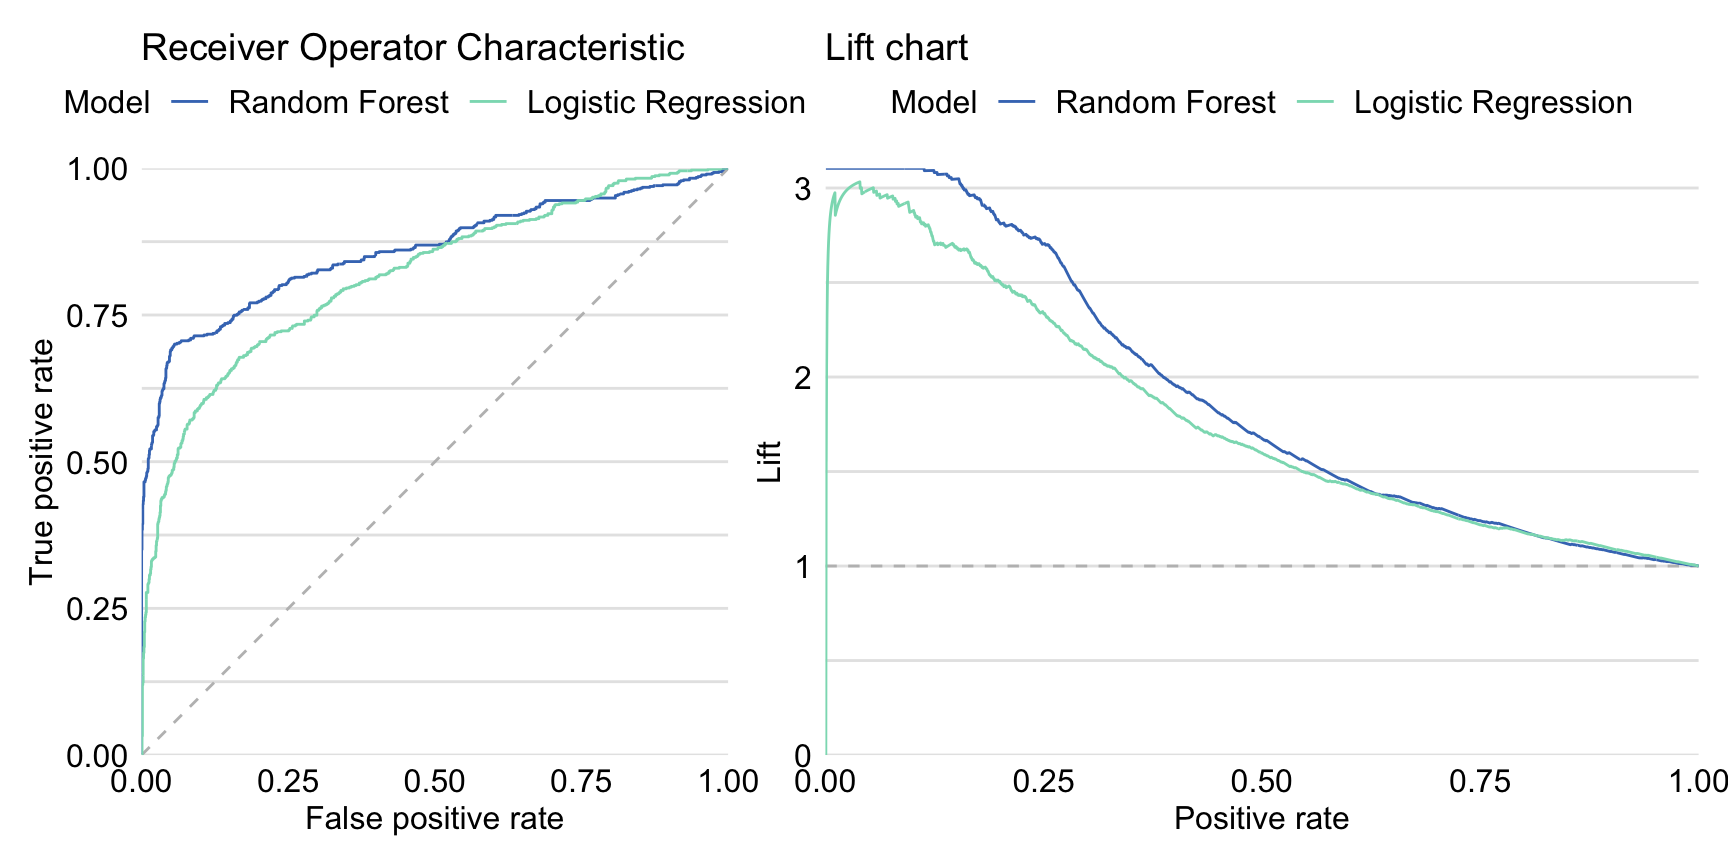 Receiver Operating Characteristic curves (left panel) and lift charts (right panel) for the random forest and logistic regression models for the Titanic dataset.